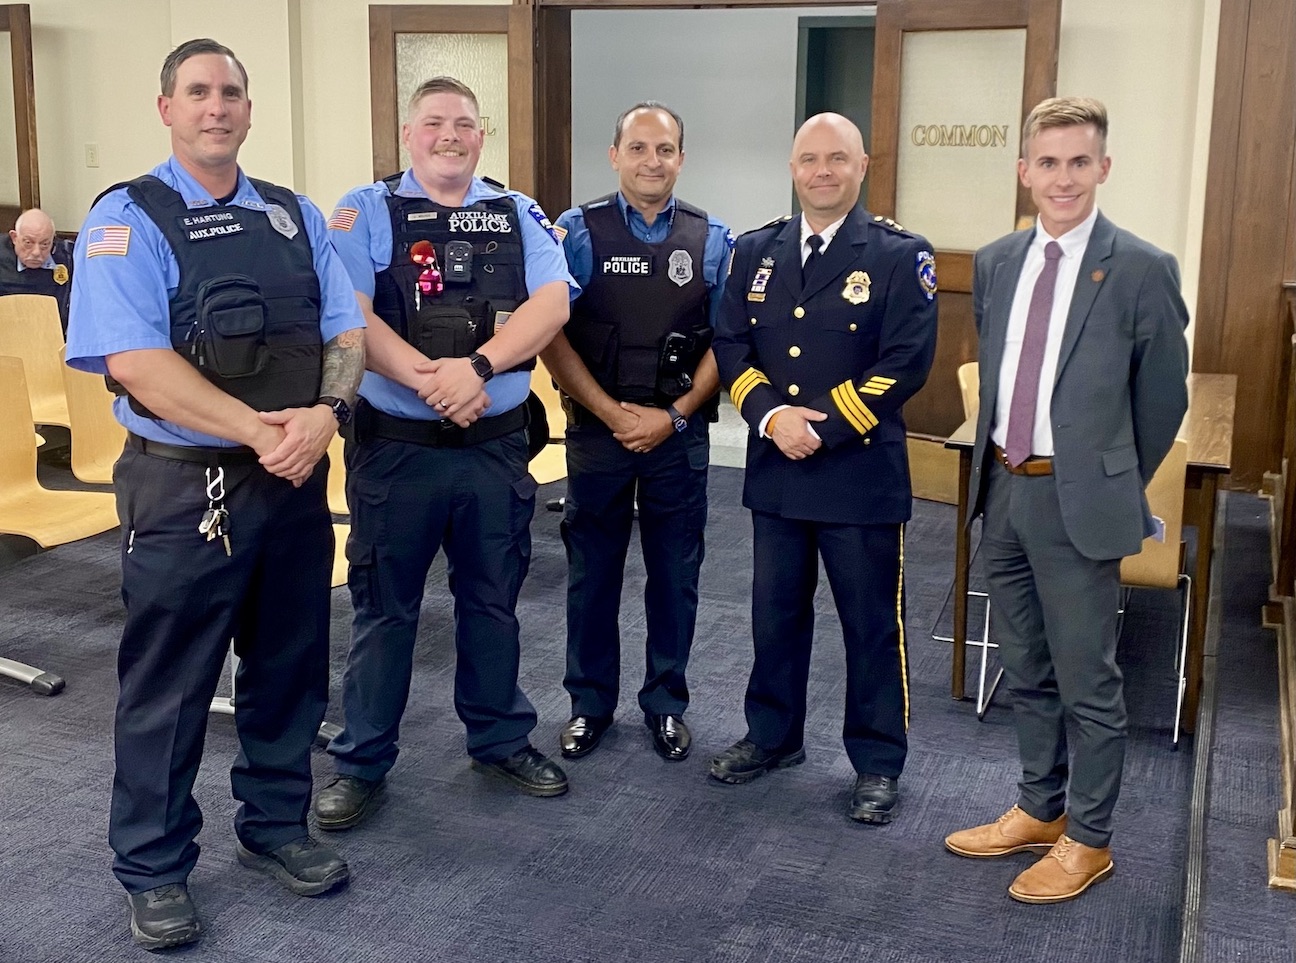 Pictured are newly appointed auxiliary officers Edward Hartung, Lucas Walker and Sherif Hanna, along with Police Chief Keith Glass and North Tonawanda Mayor Austin Tylec. (Submitted photos)